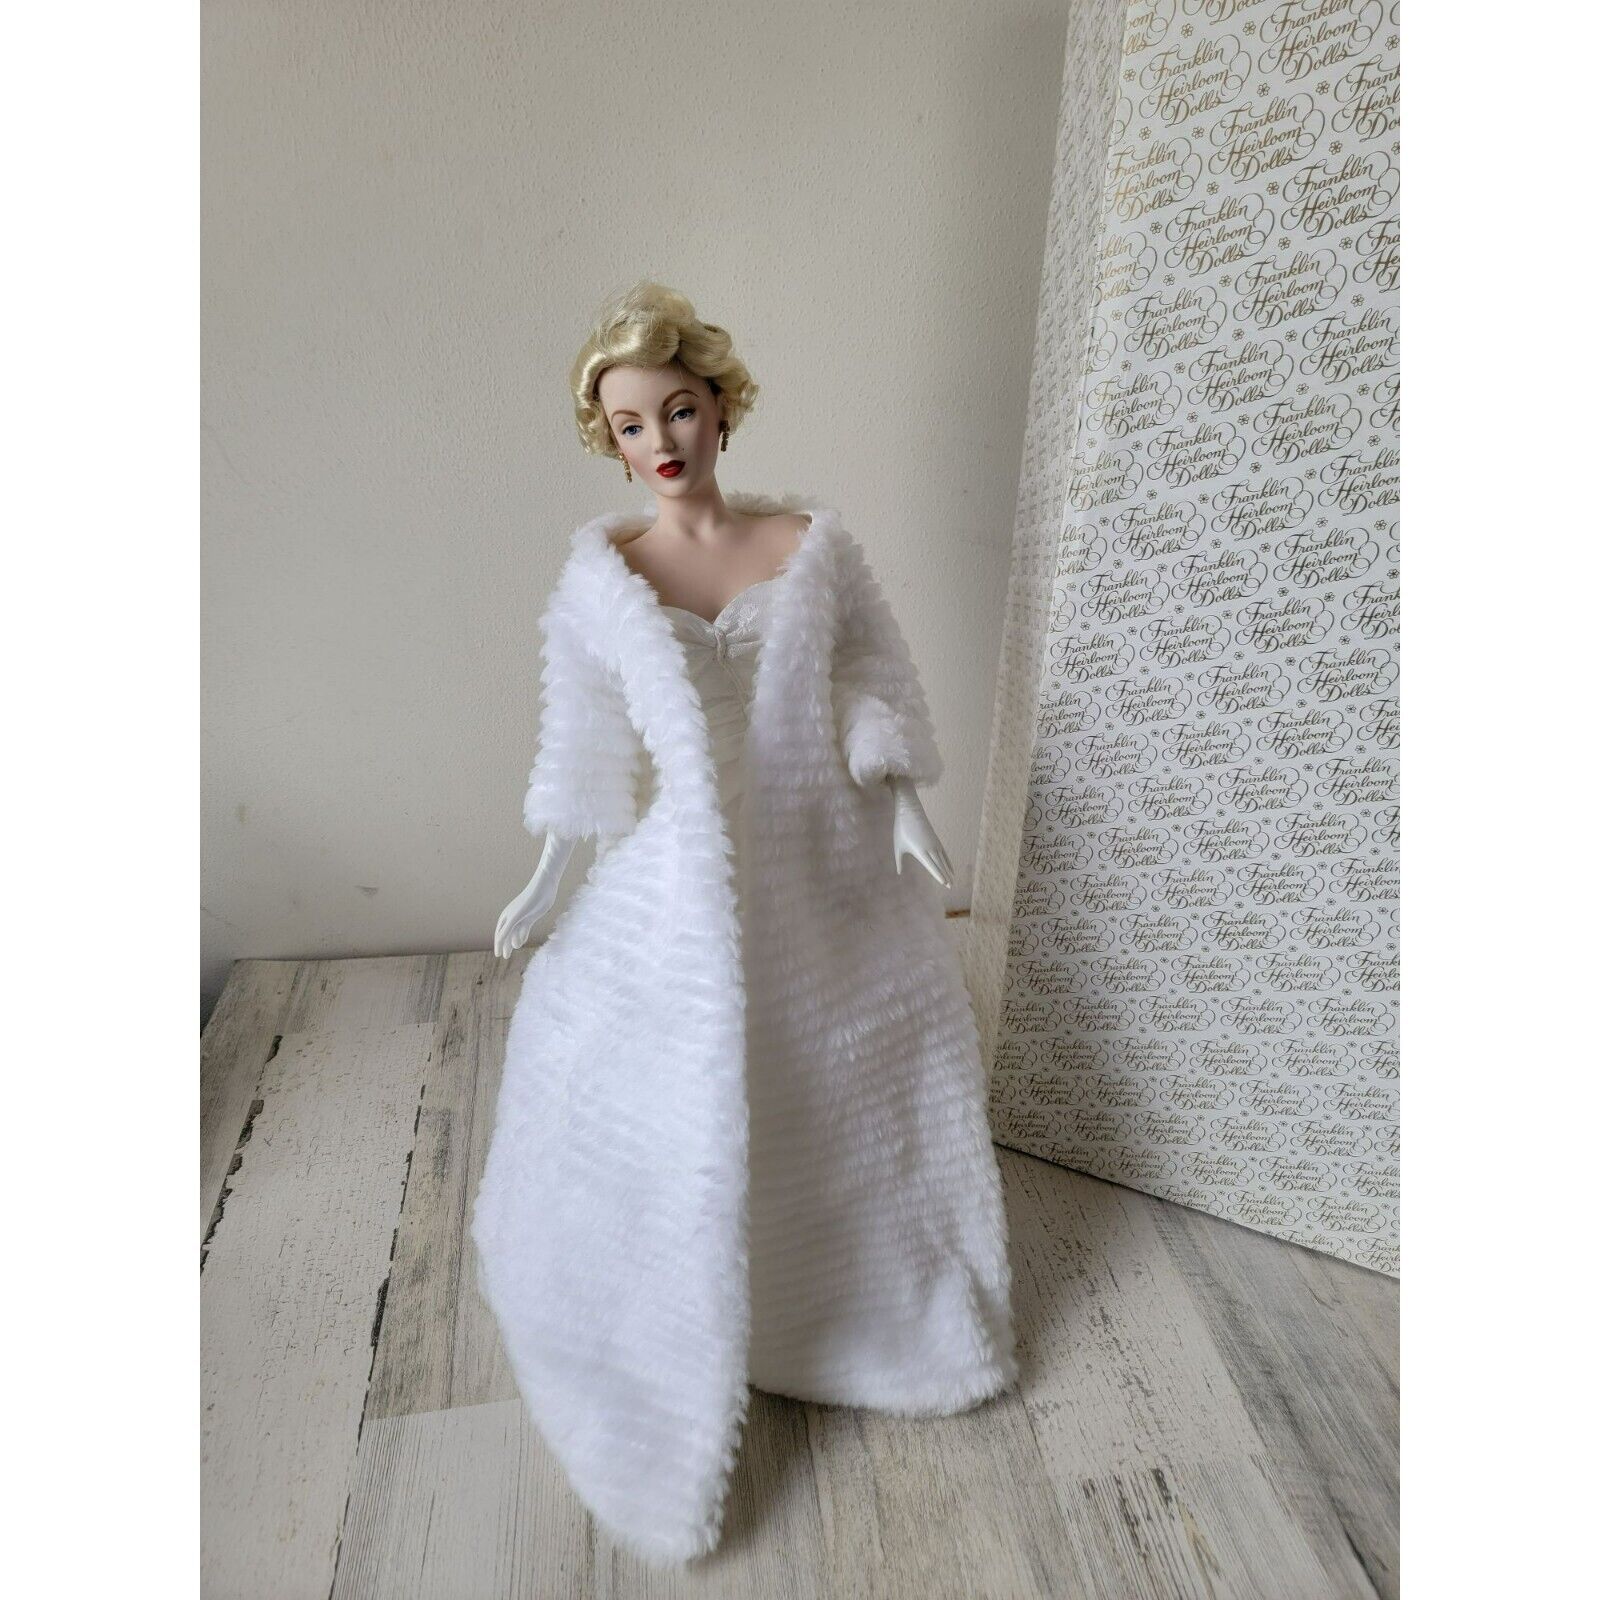 Franklin heirloom Maryland Monroe All About Eve doll collectible